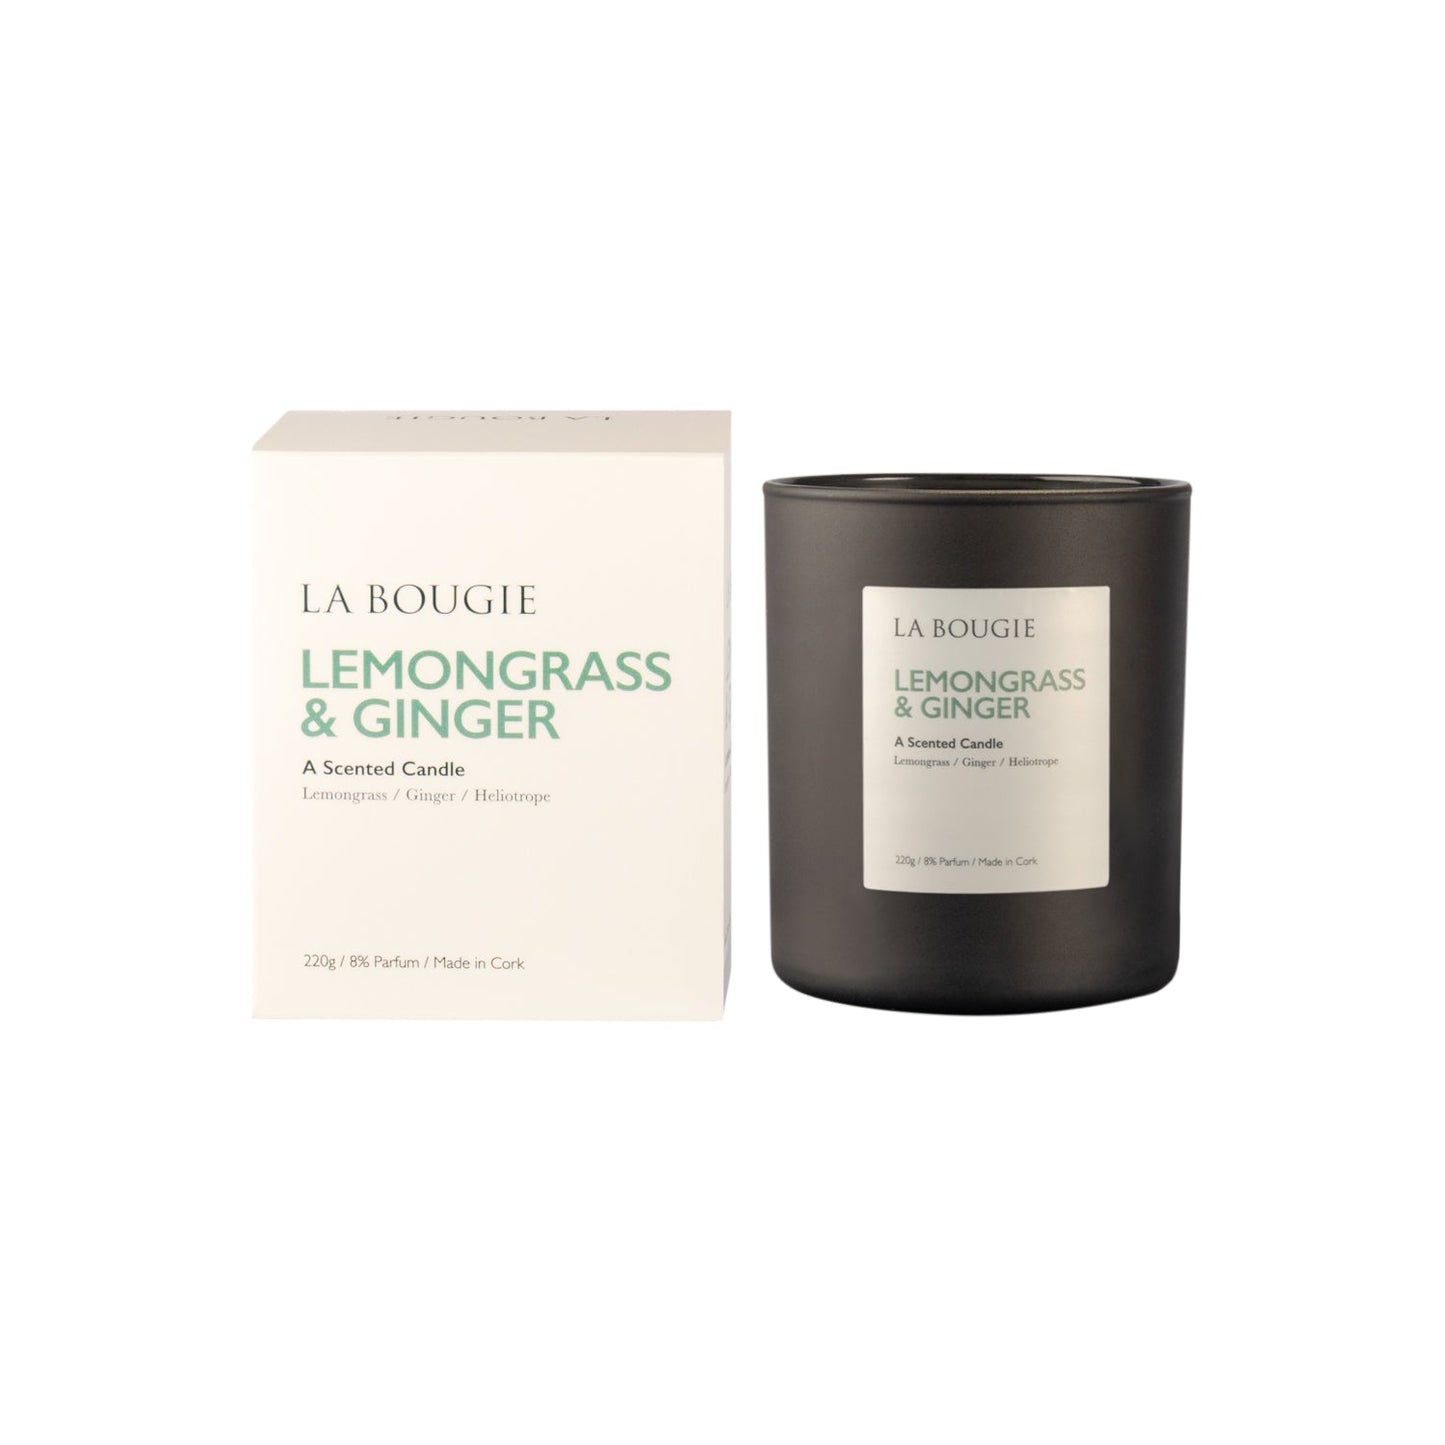 La Bougie Lemongrass and Ginger Scented Candle